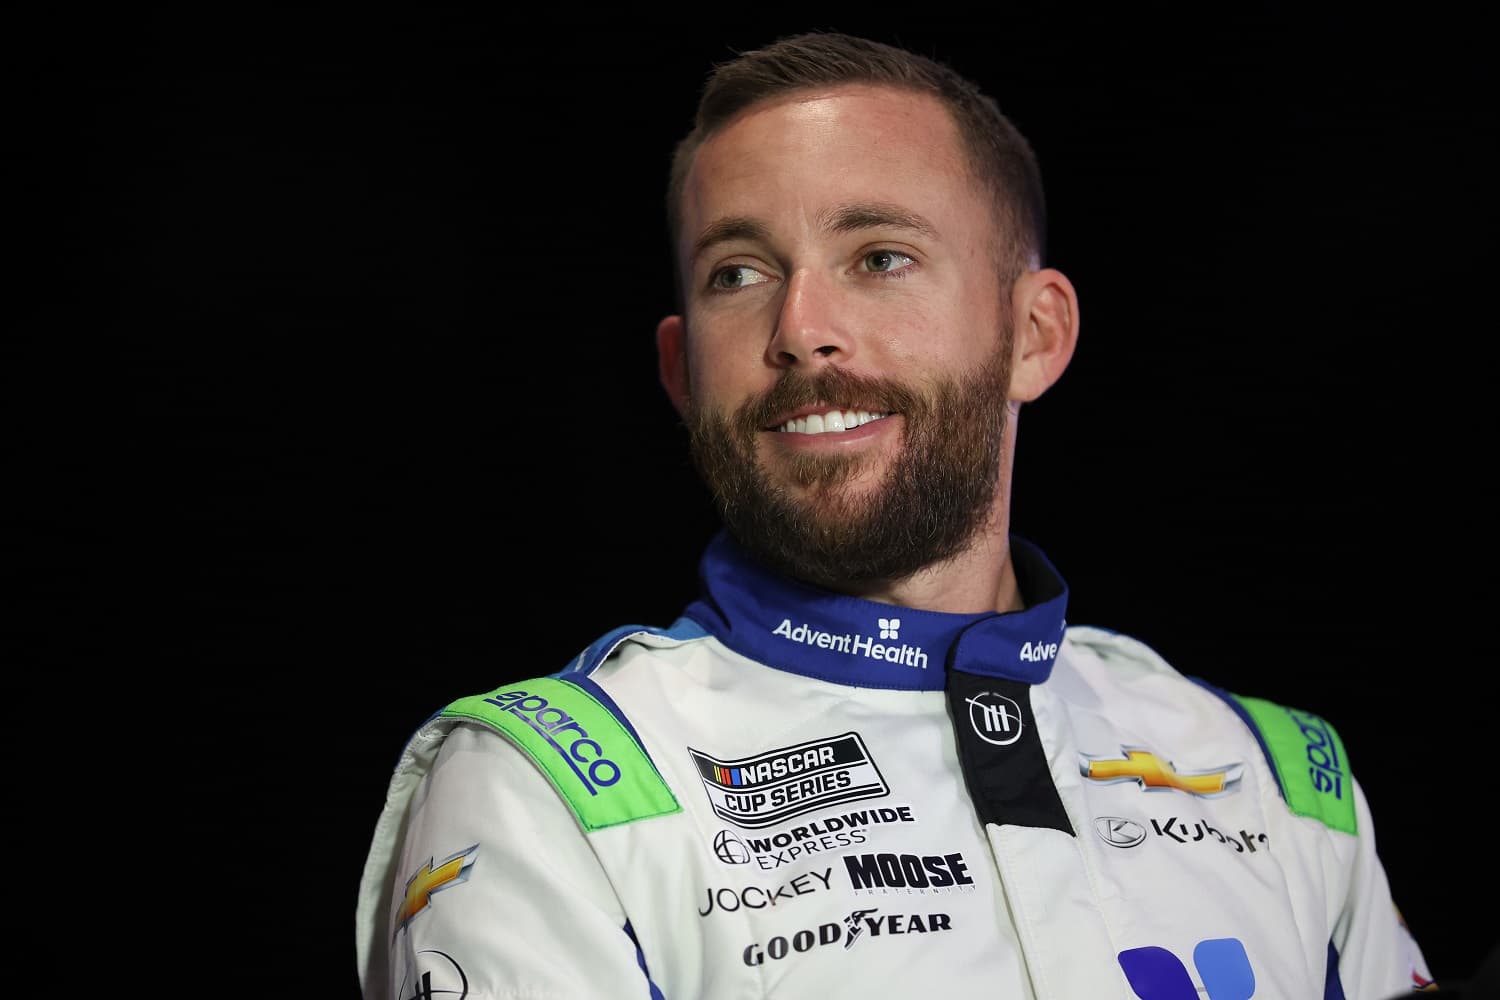 Ross Chastain speaks to the media during the NASCAR Cup Series Daytona 500 Media Day on Feb. 15, 2023.